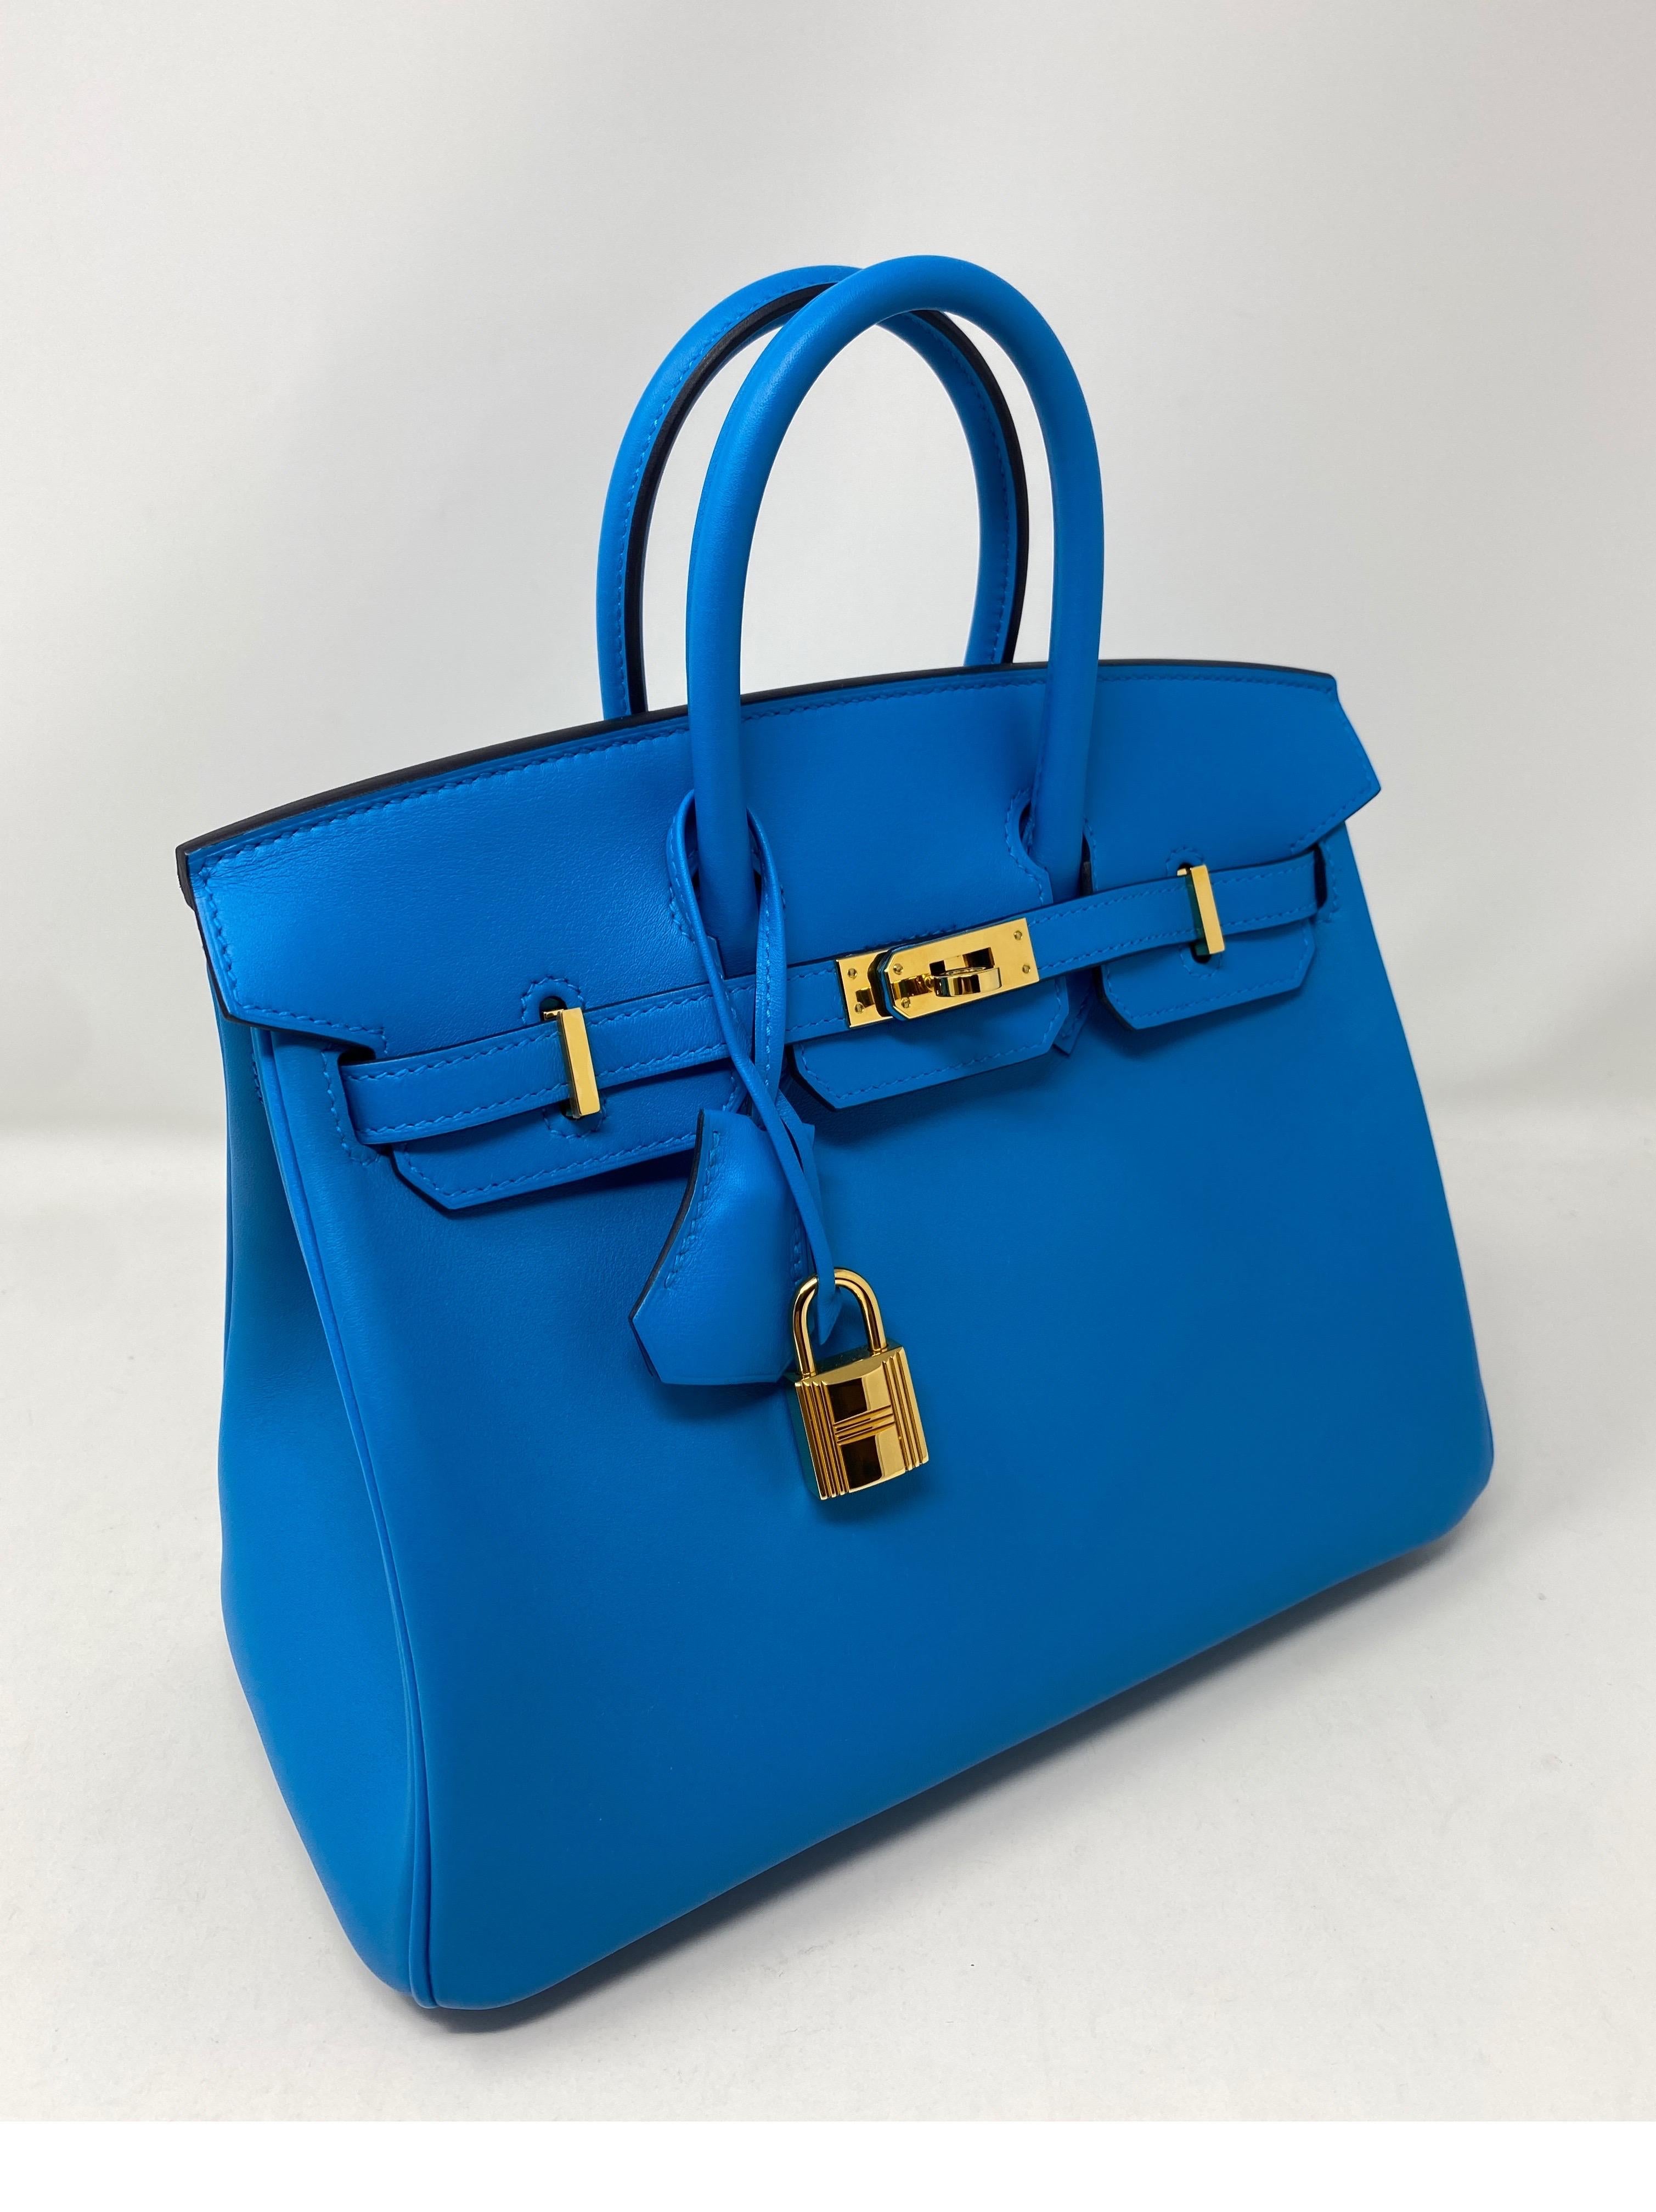 Hermes Birkin 25 Bleu Frida Bag in Swift leather. Most coveted size 25 that's almost impossible to find. Brand new., purchased 2021. Never worn. Gold hardware. Gorgeous, vibrant blue color. The unicorn bag of Hermes. Collector's piece. Full set: